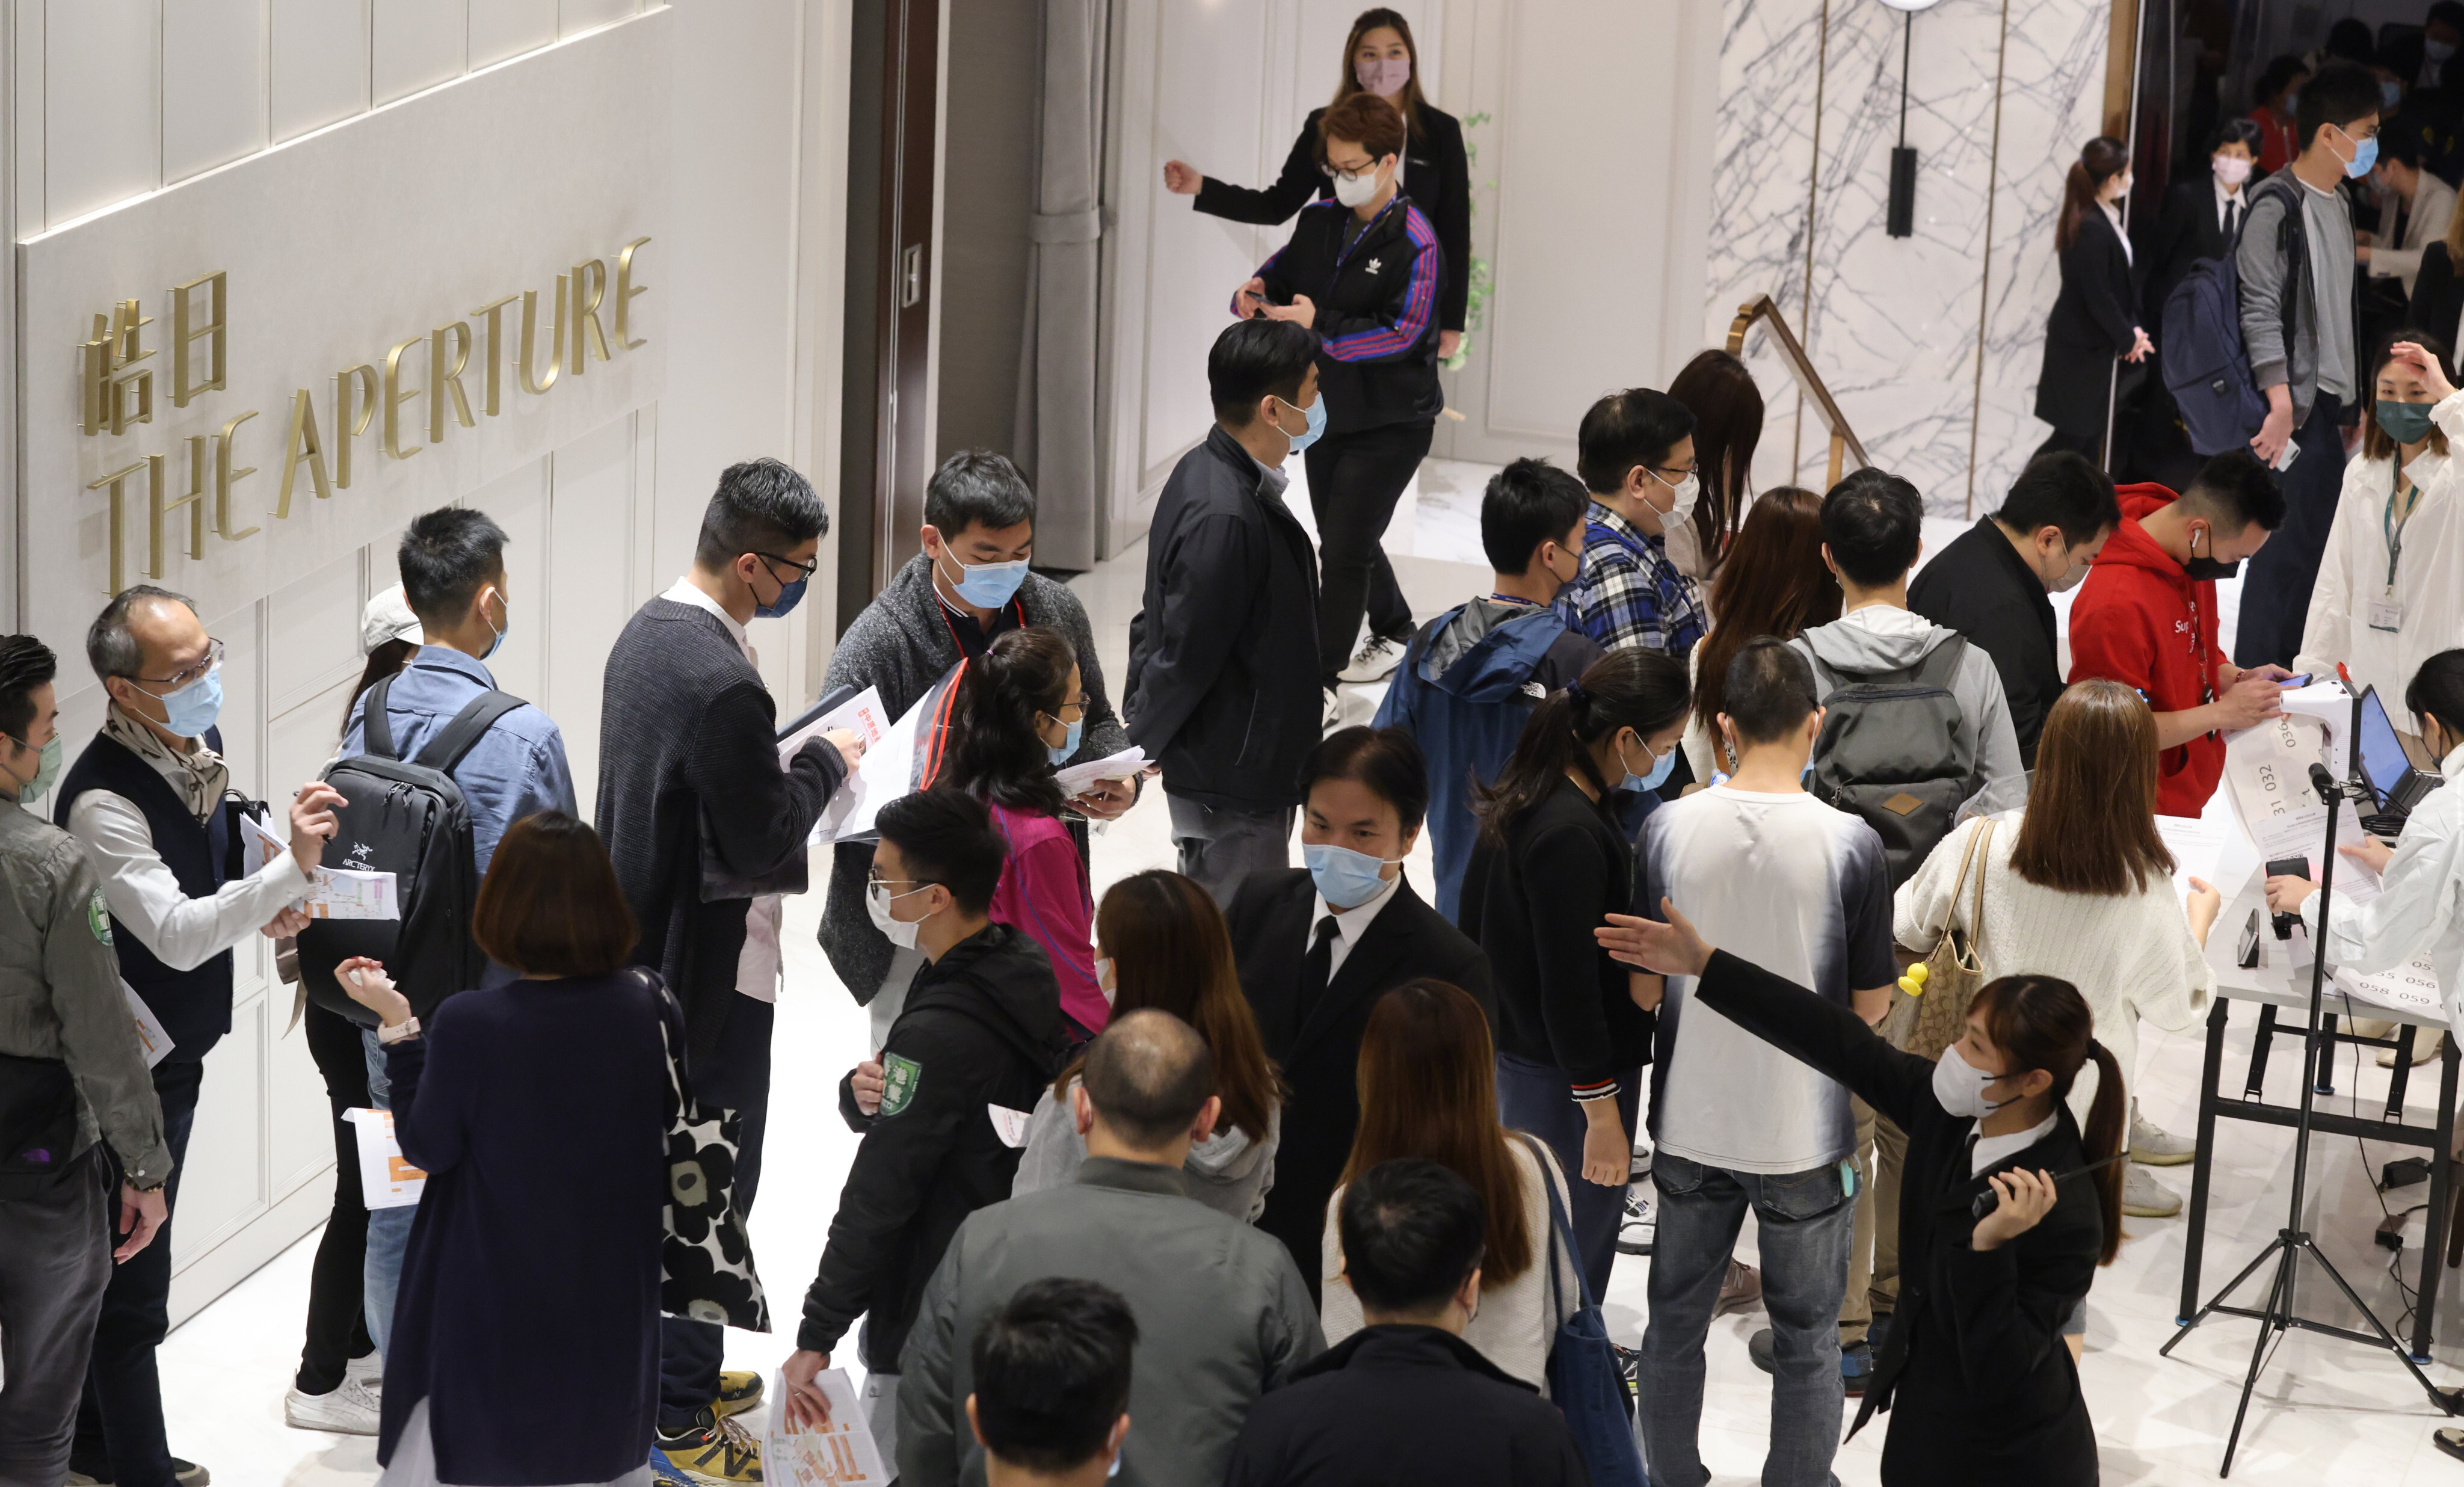 People lining up for The Aperture development, built by Hang Lung Properties, in Kowloon Bay on 11 December 2021. Photo: May Tse